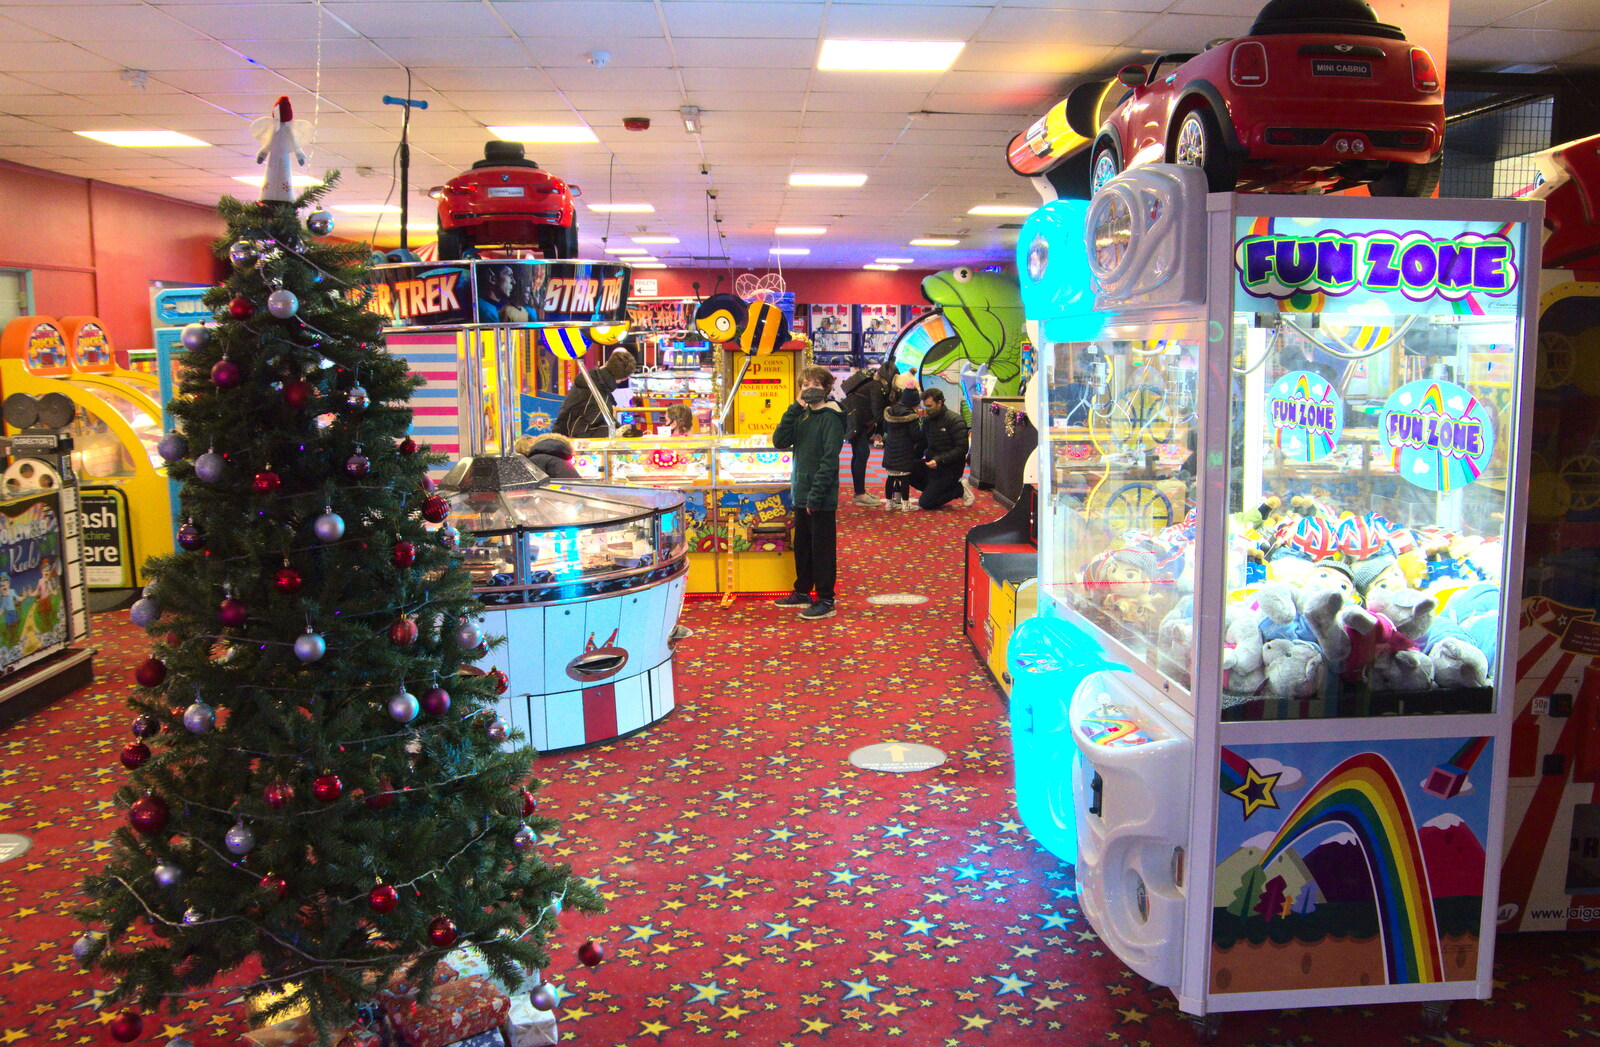 The Covid-quiet amusement arcade from A Return to the Beach, Southwold, Suffolk - 20th December 2020